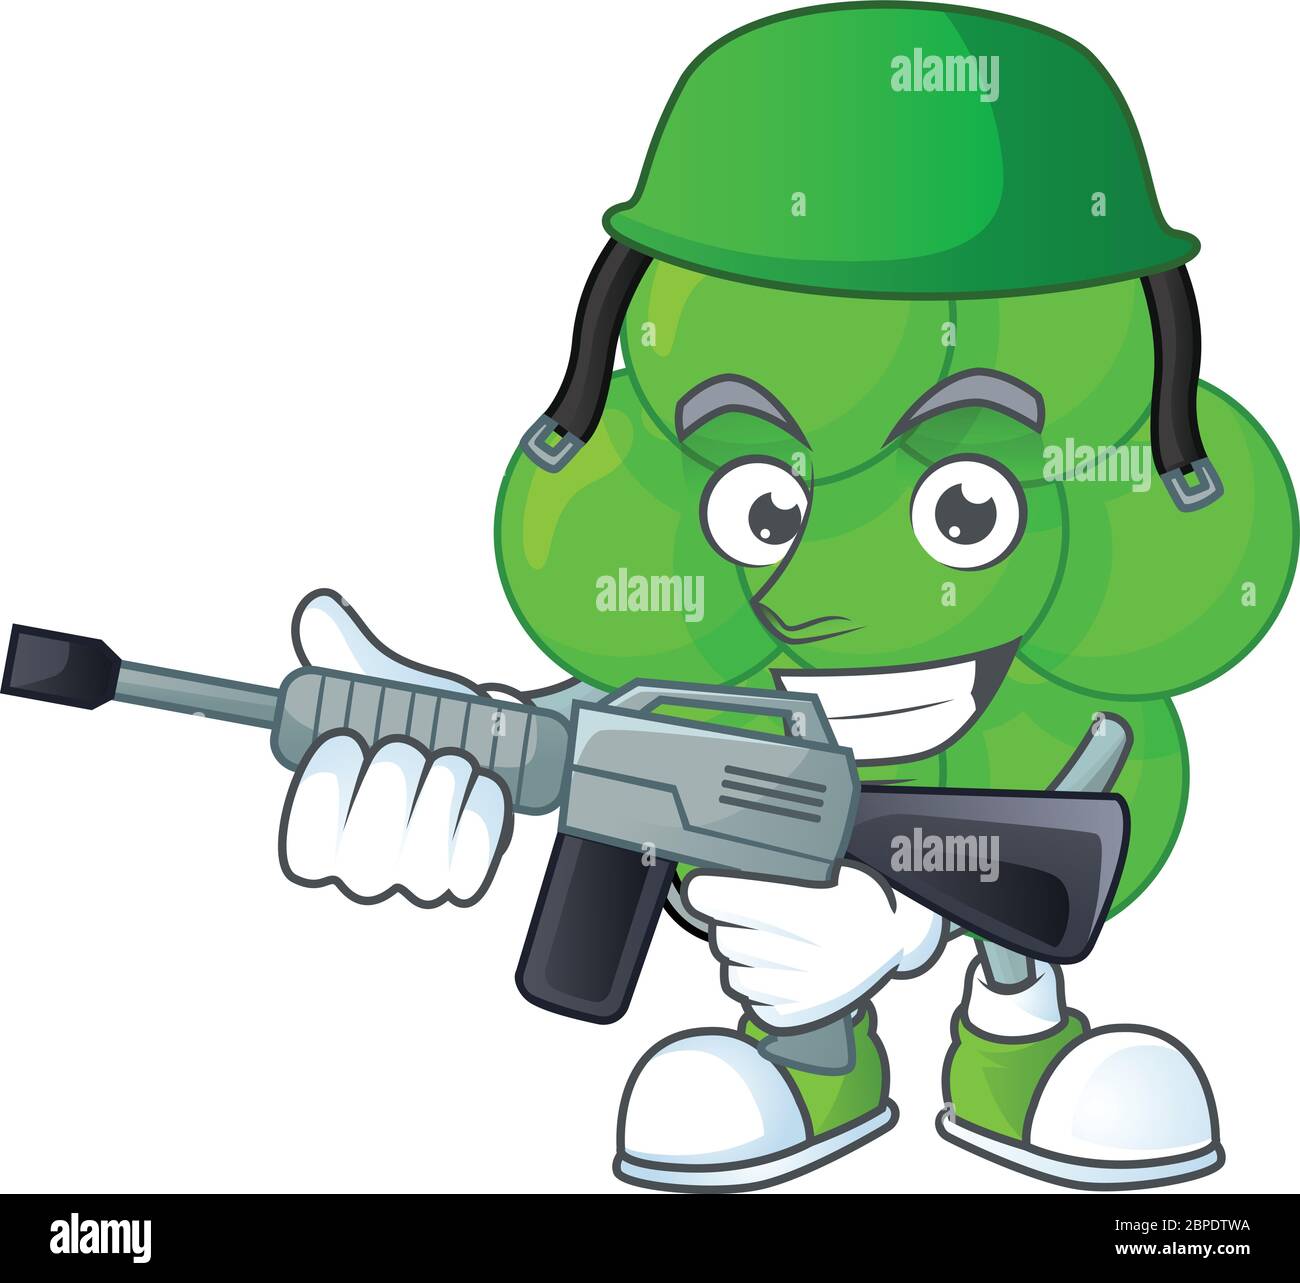 A mascot design picture of staphylococcus aureus as a dedicated Army using automatic gun Stock Vector